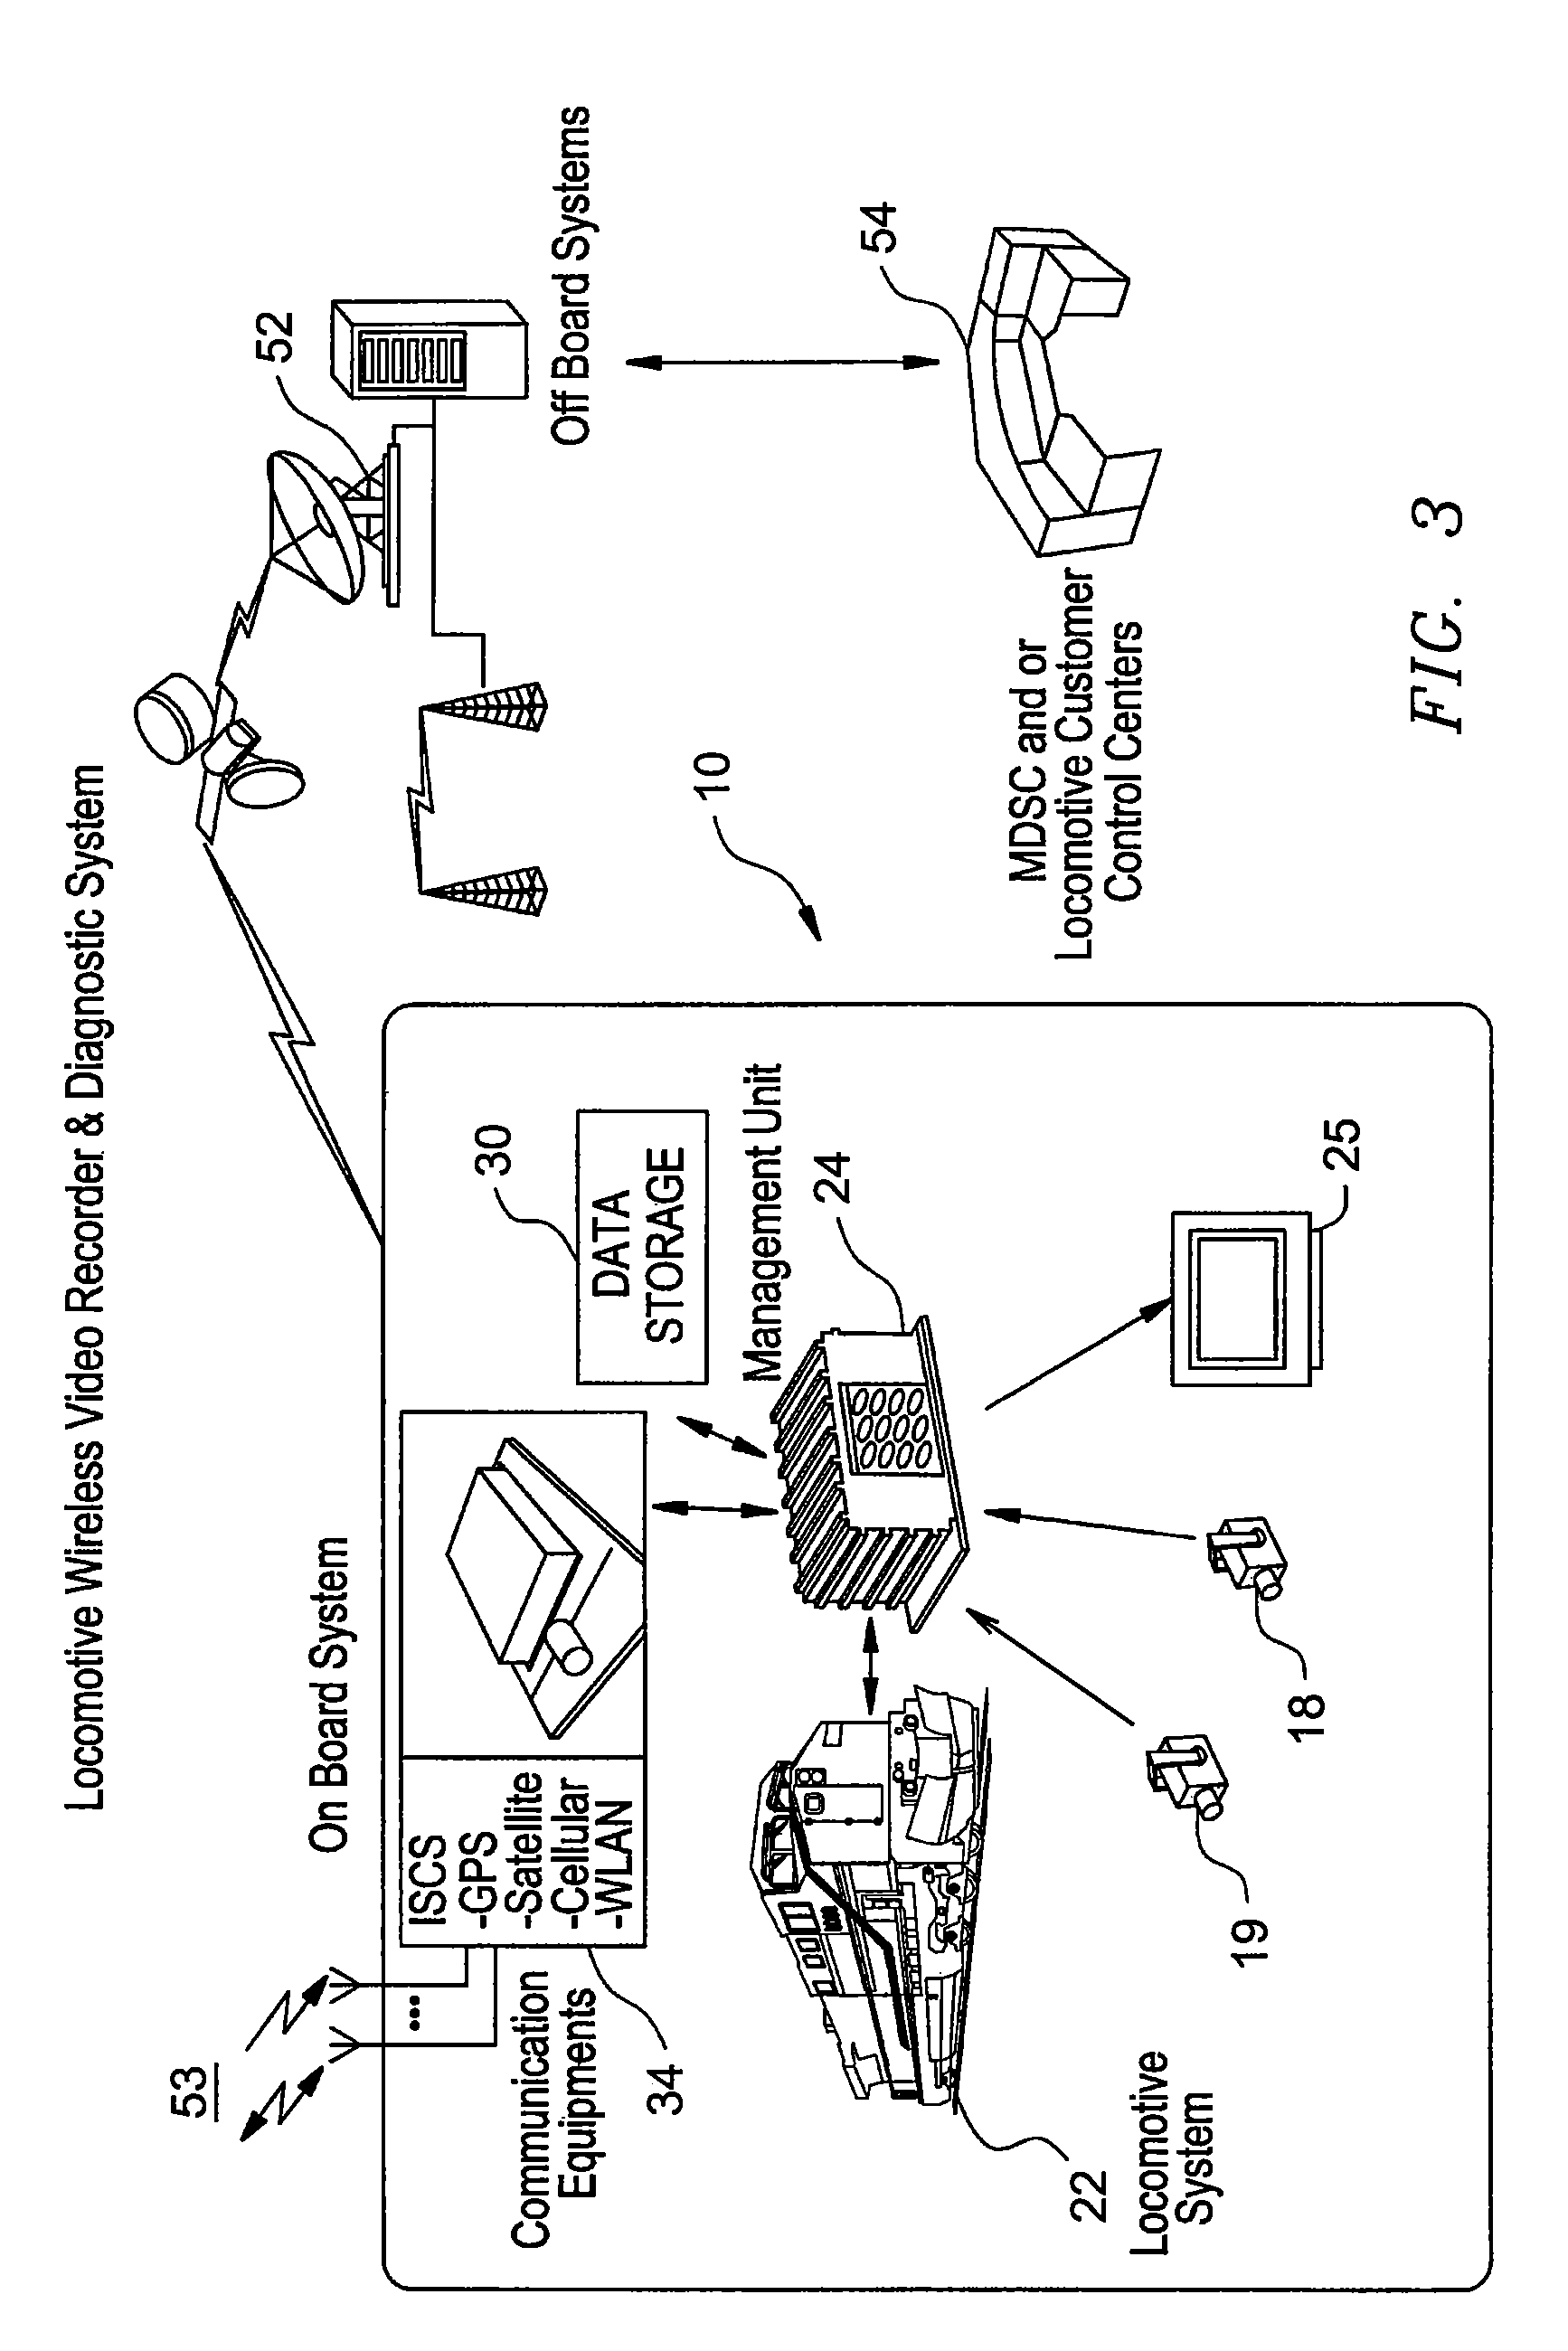 System and method for determining characteristic information of an object positioned adjacent to a route